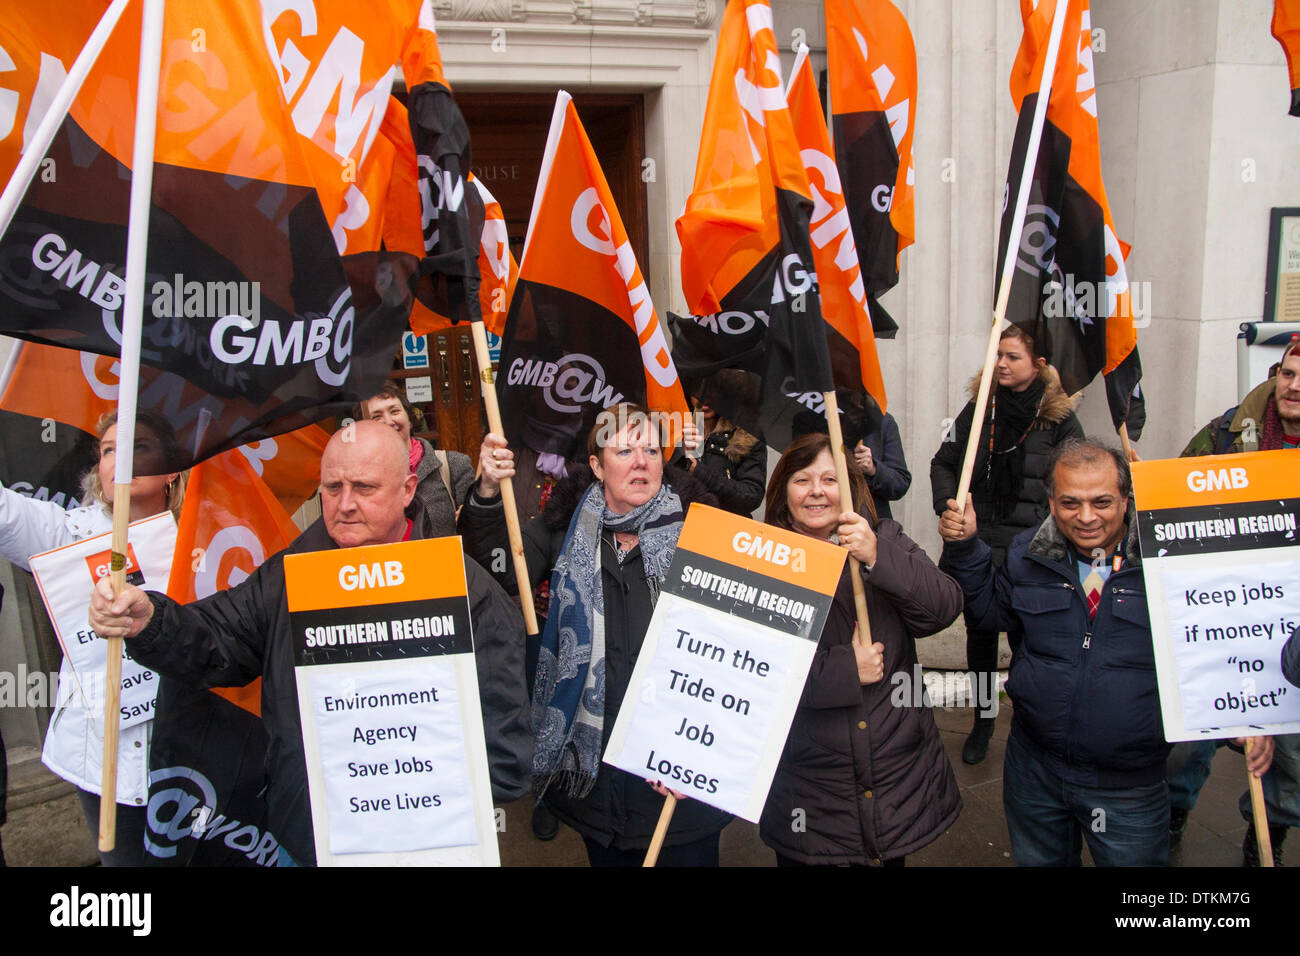 London, February 20th 2014. Protesters from the GMB Union demonstrate in London ahead of a meeting to discuss proposed cuts to 1,700 jobs with the Environment Agency, which looks after many of the UK's rivers. Credit:  Paul Davey/Alamy Live News Stock Photo